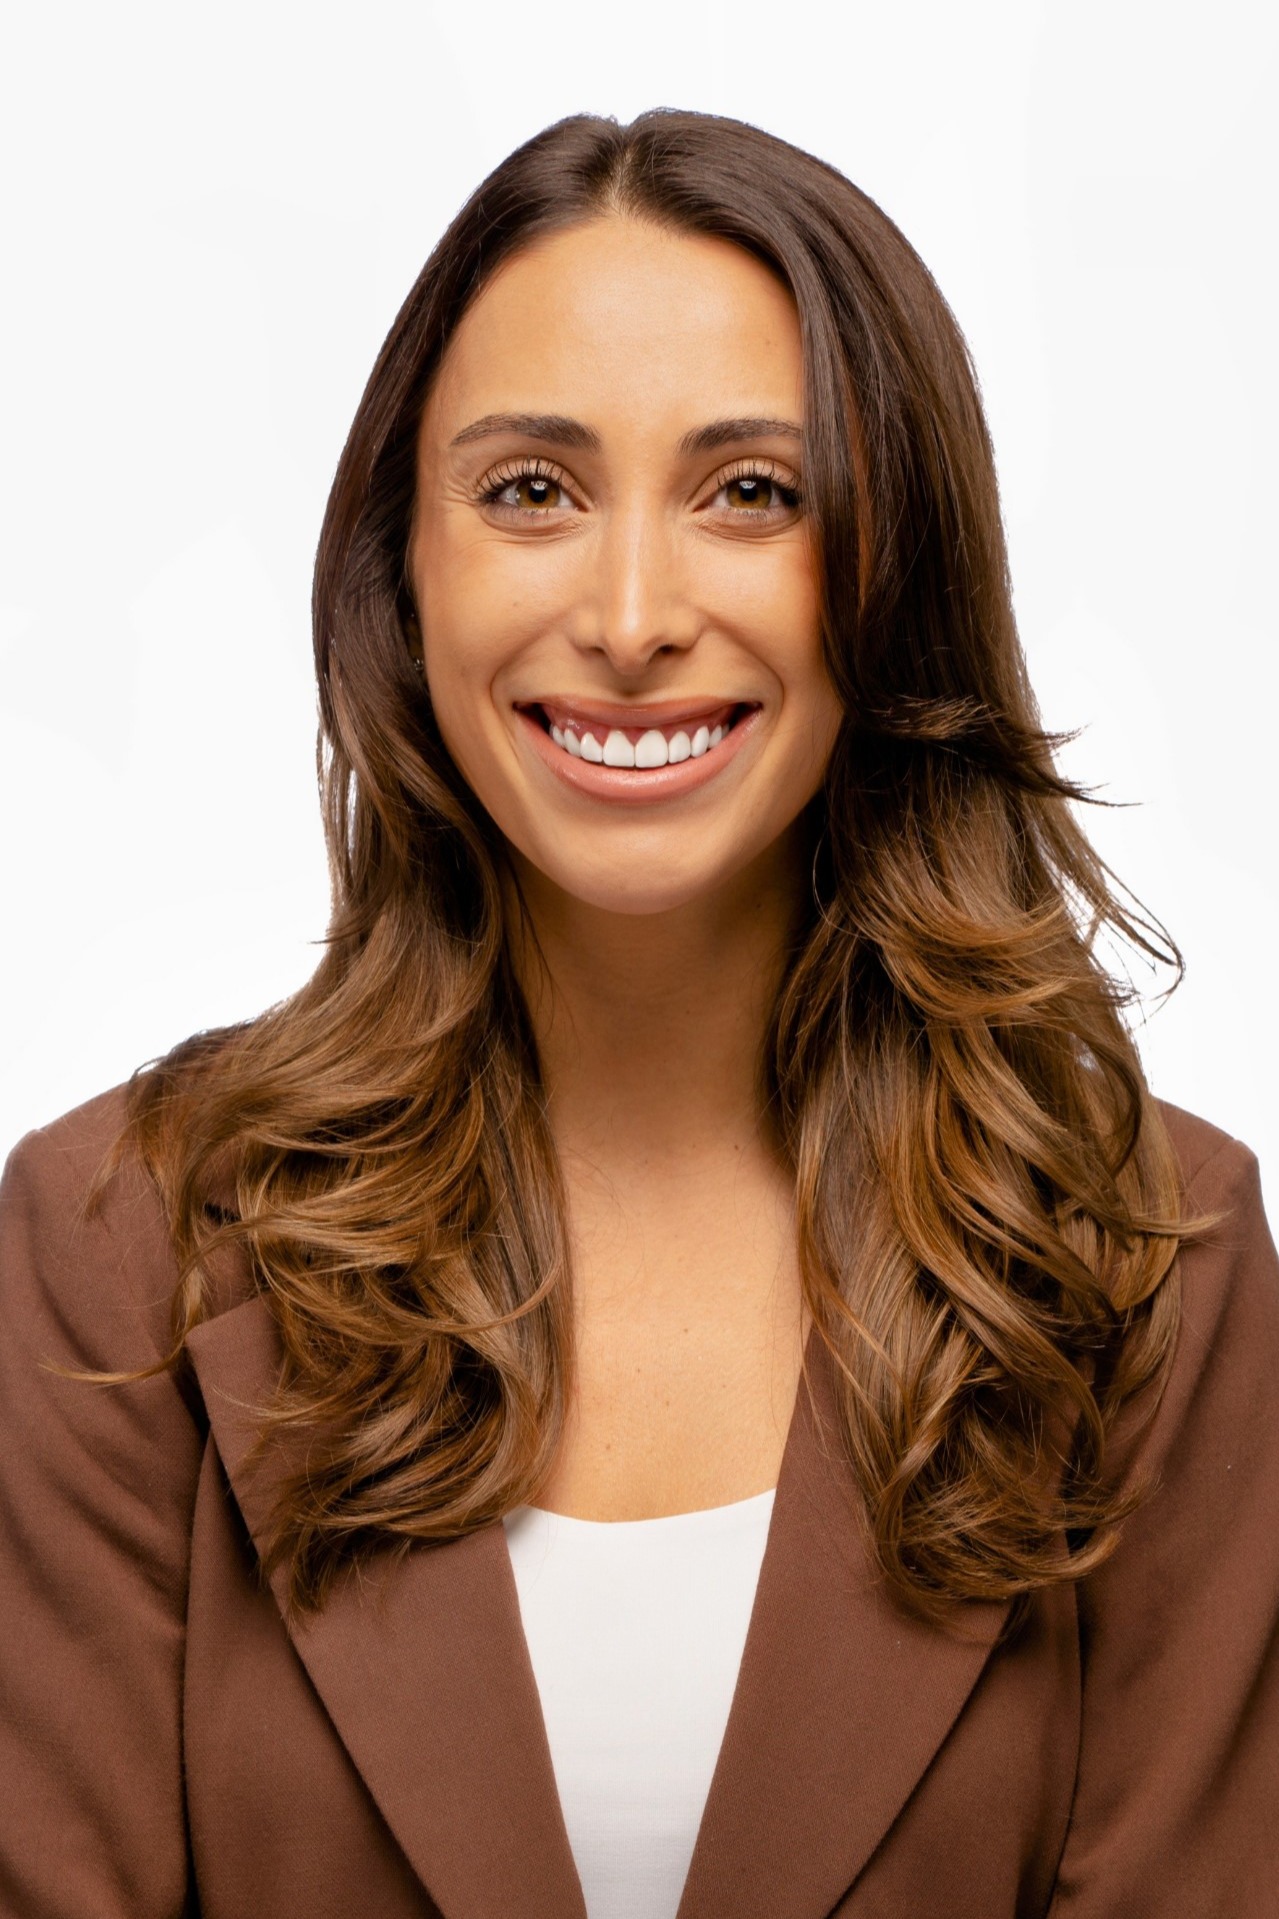 Alexandra Silano real estate agent and team member of The ONE94 Group